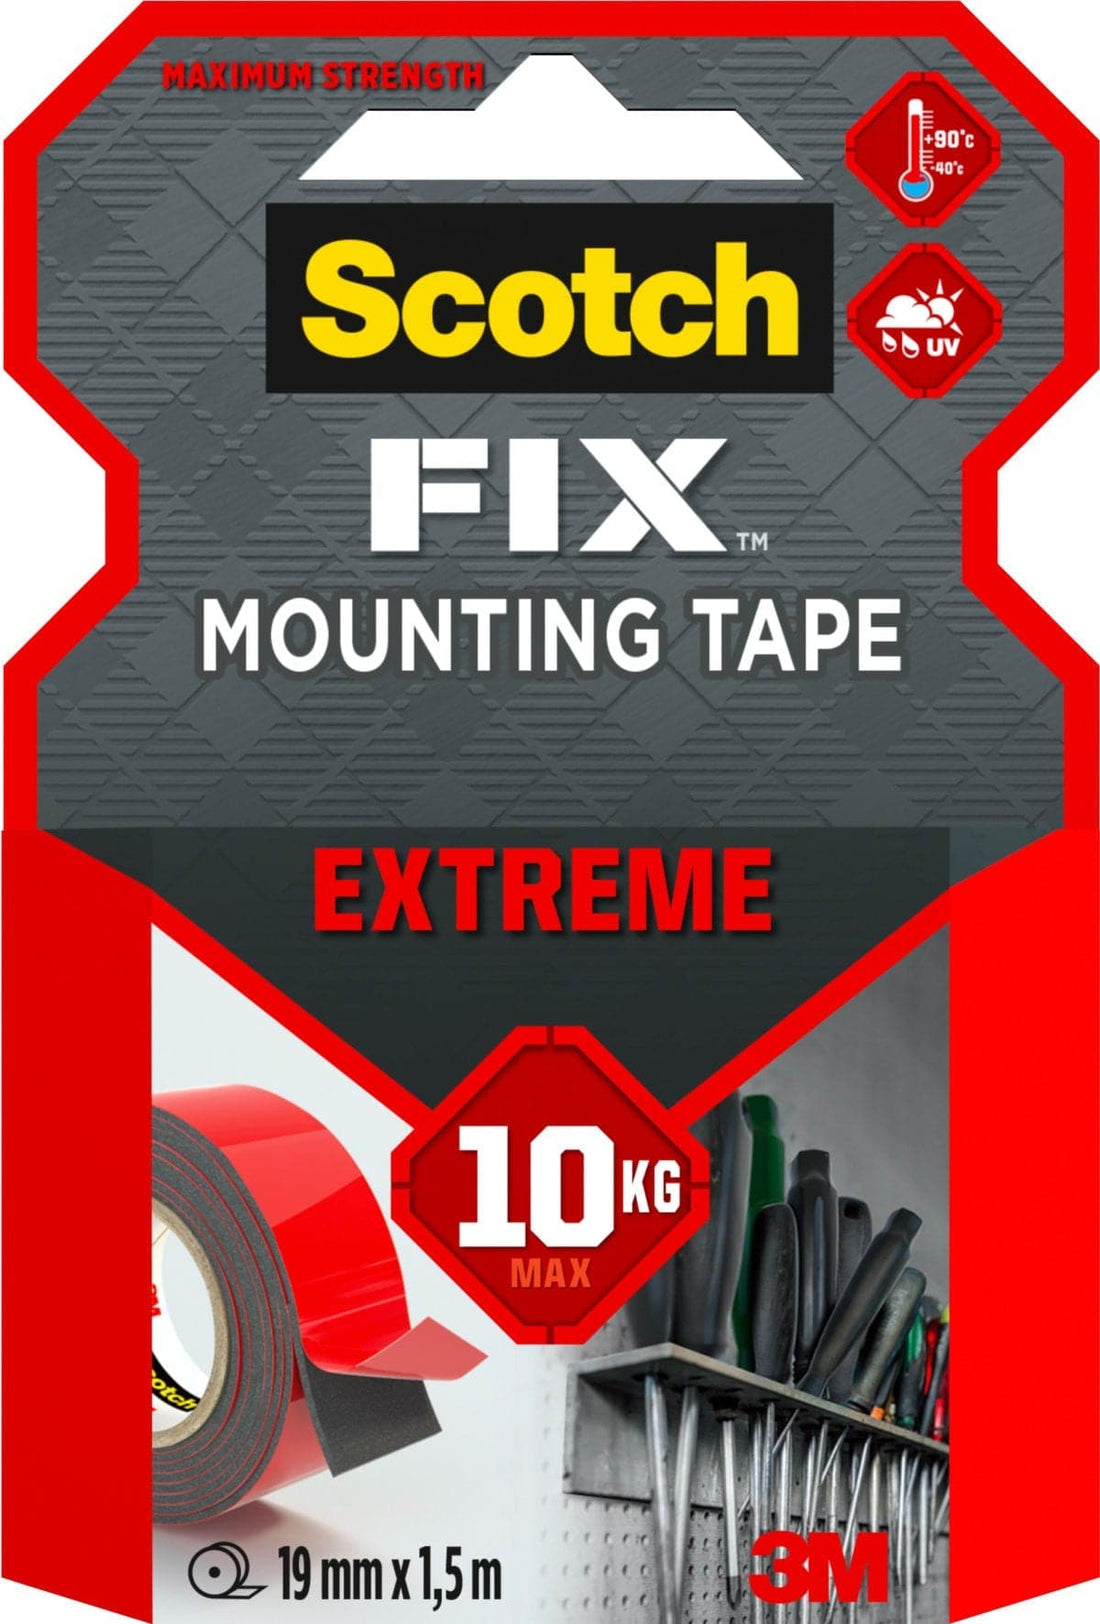 SCOTCH-FIXEXTREME FIXING TAPE UP TO 10 KG 19 MM X 1.5 M - best price from Maltashopper.com BR410007413